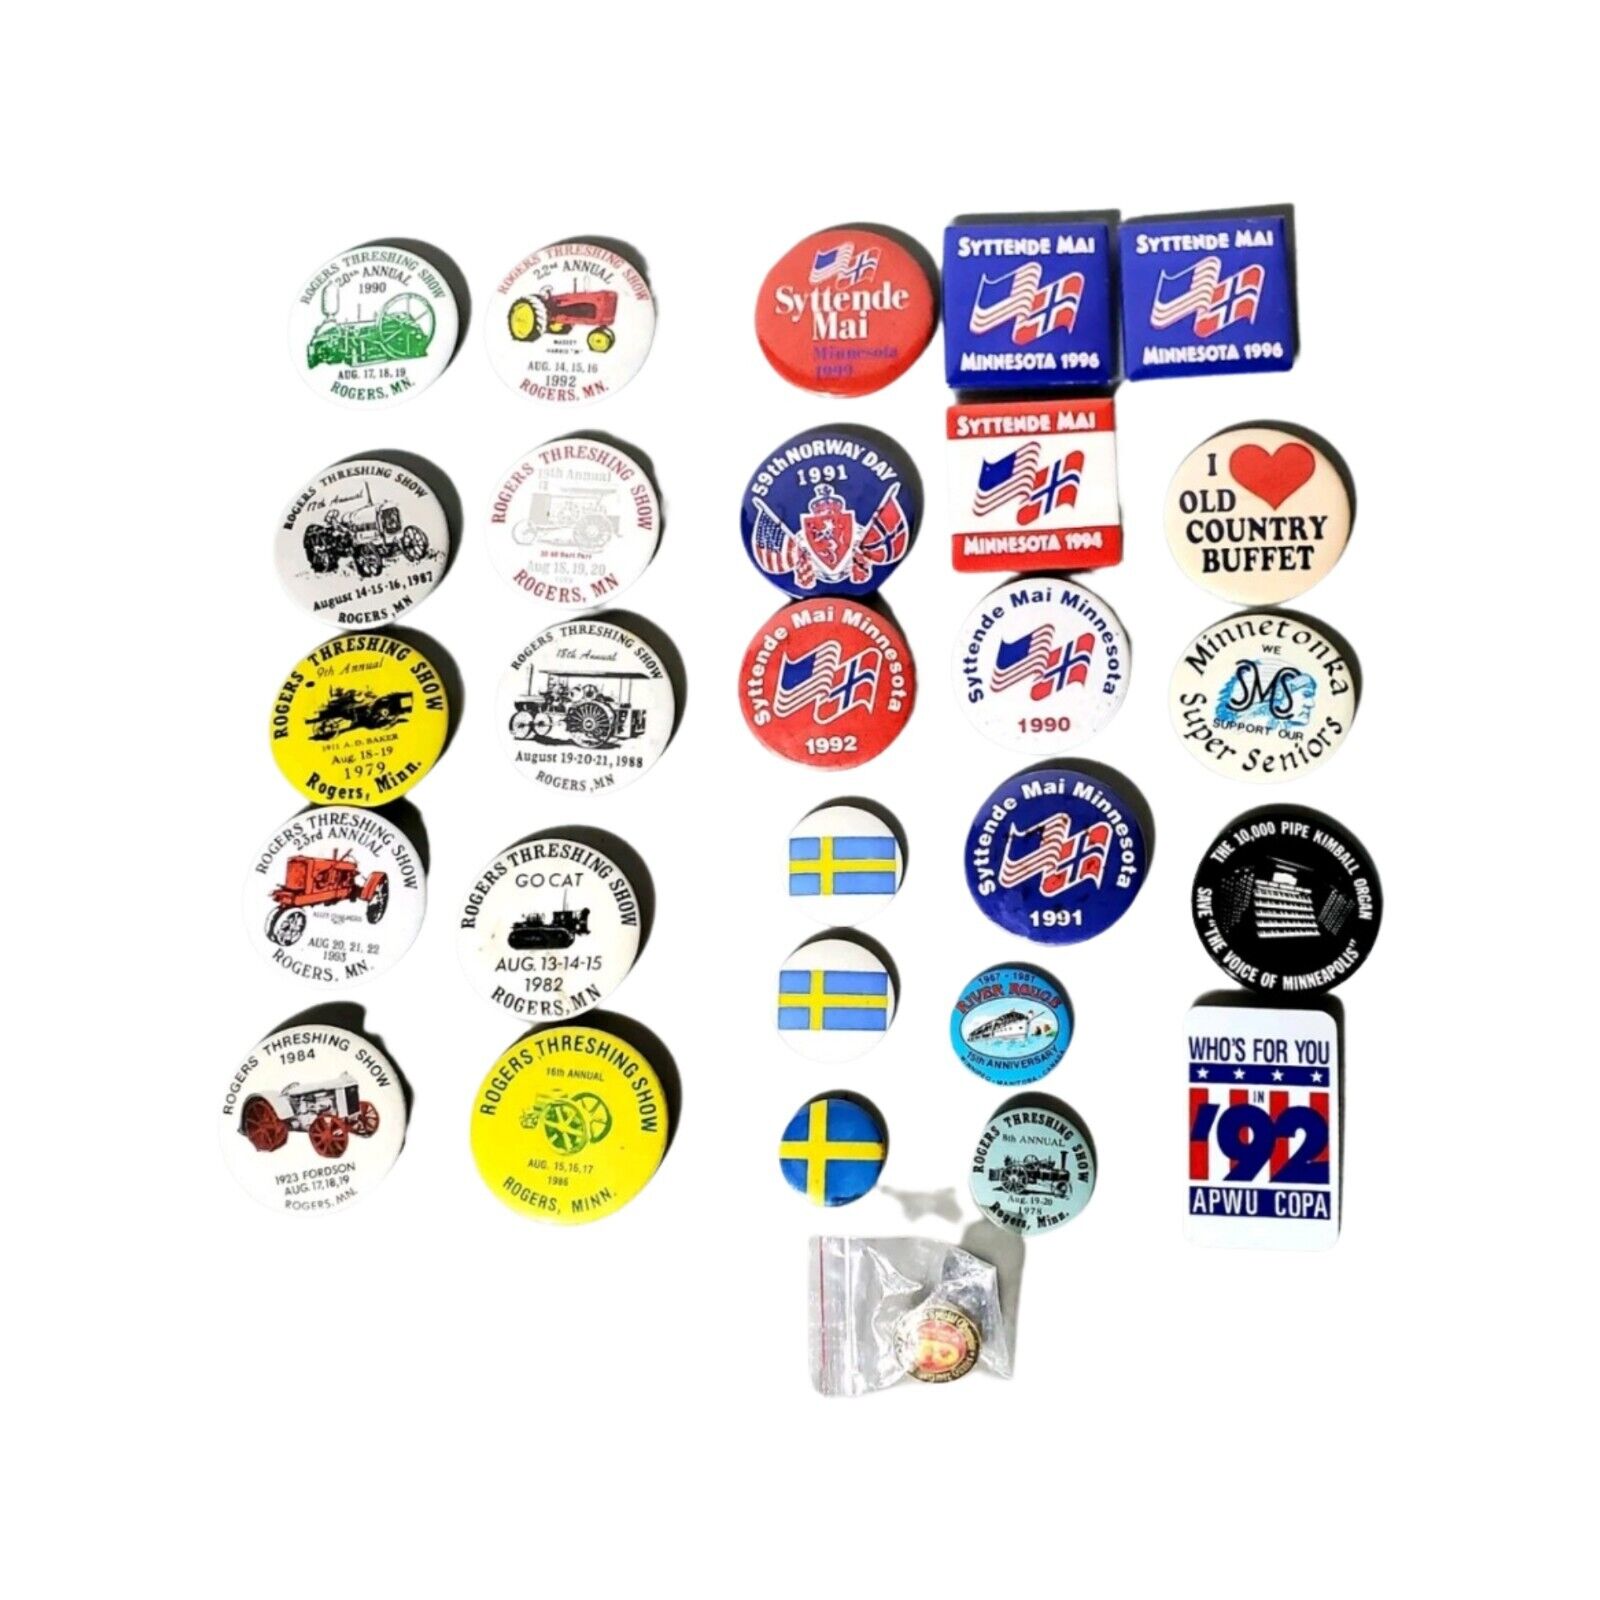 Vintage 1990s Button Pinback Lot Awesome Nordic Pride Festivals and more 25+.